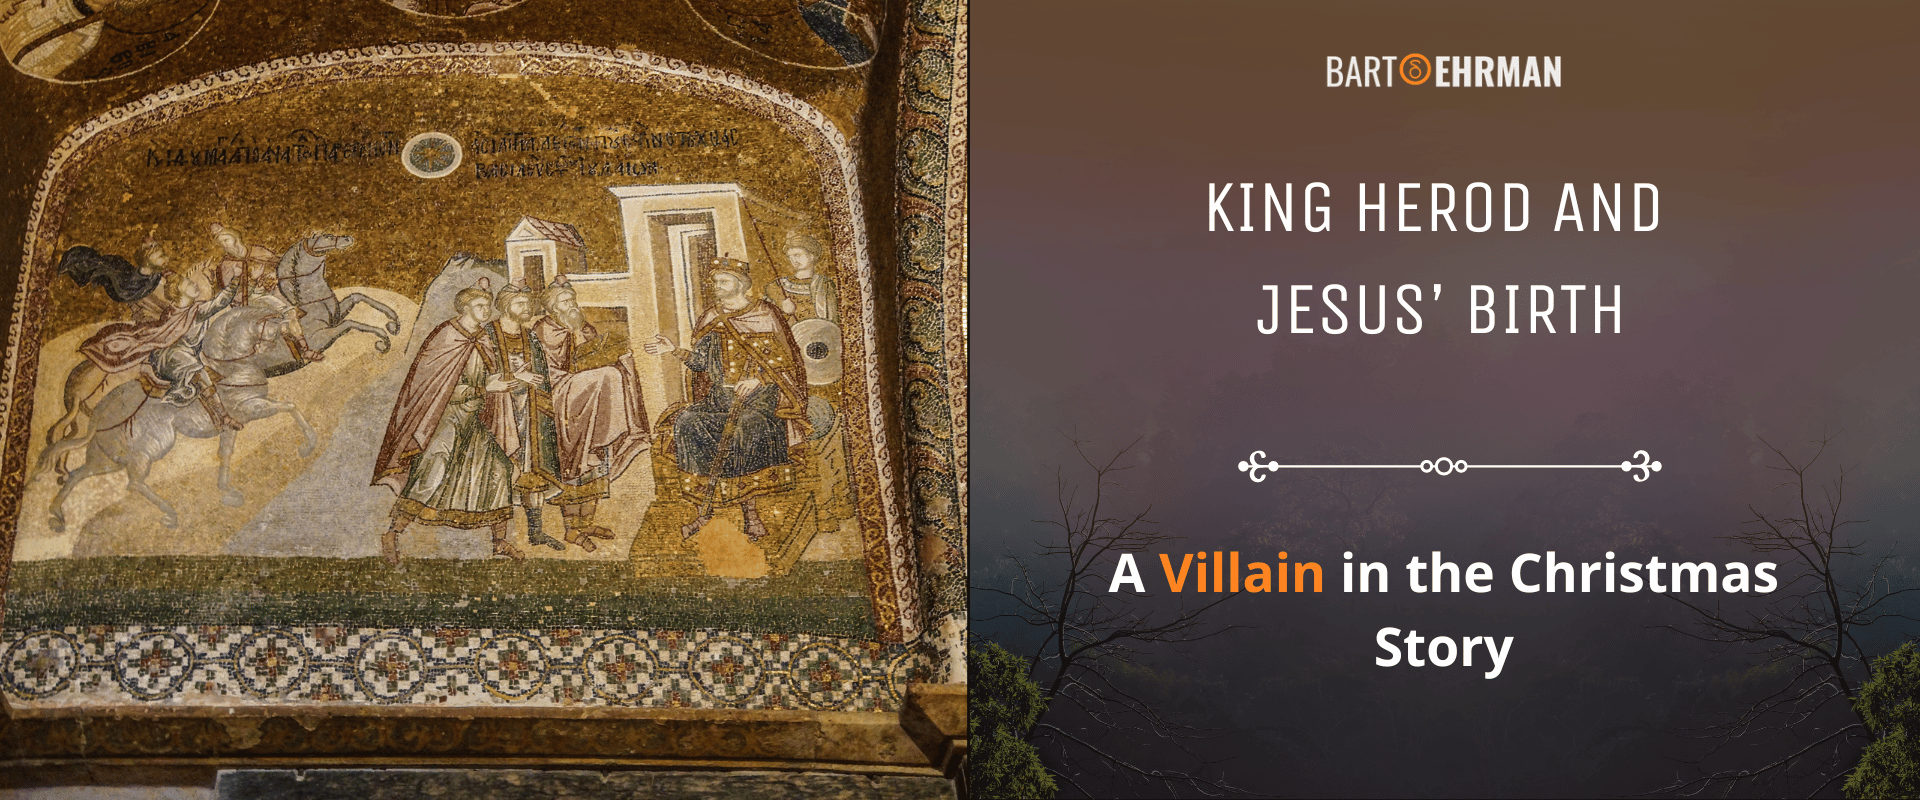 King Herod and Jesus’ Birth - A Villain in the Christmas Story